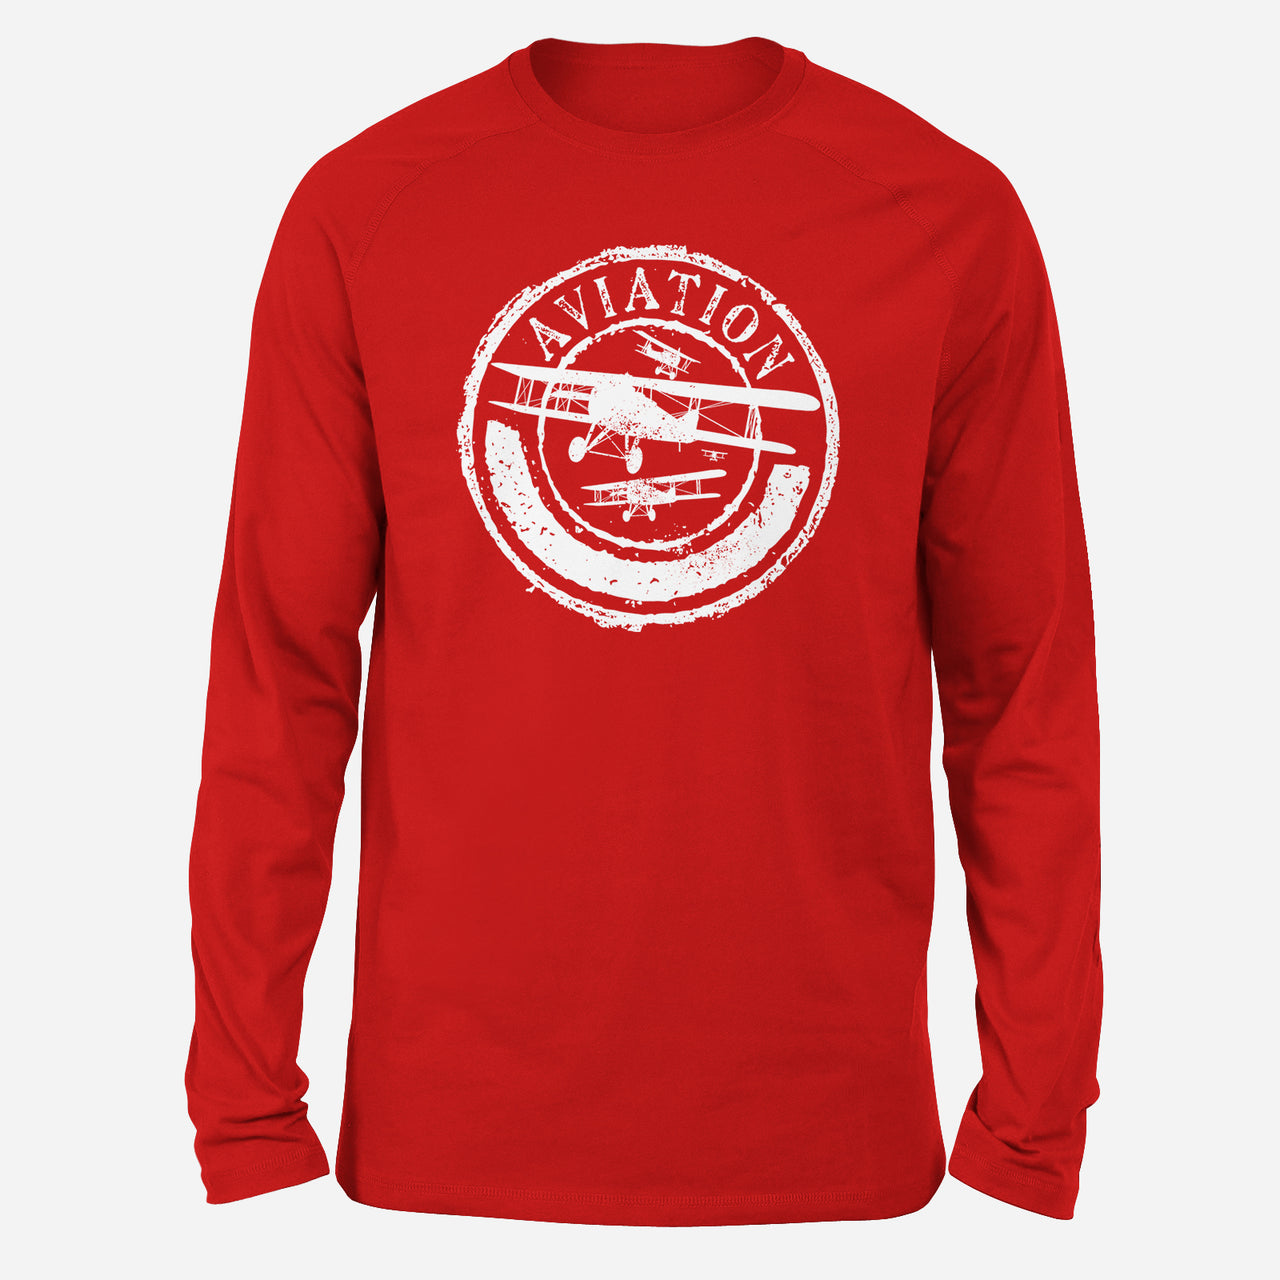 Aviation Lovers Designed Long-Sleeve T-Shirts